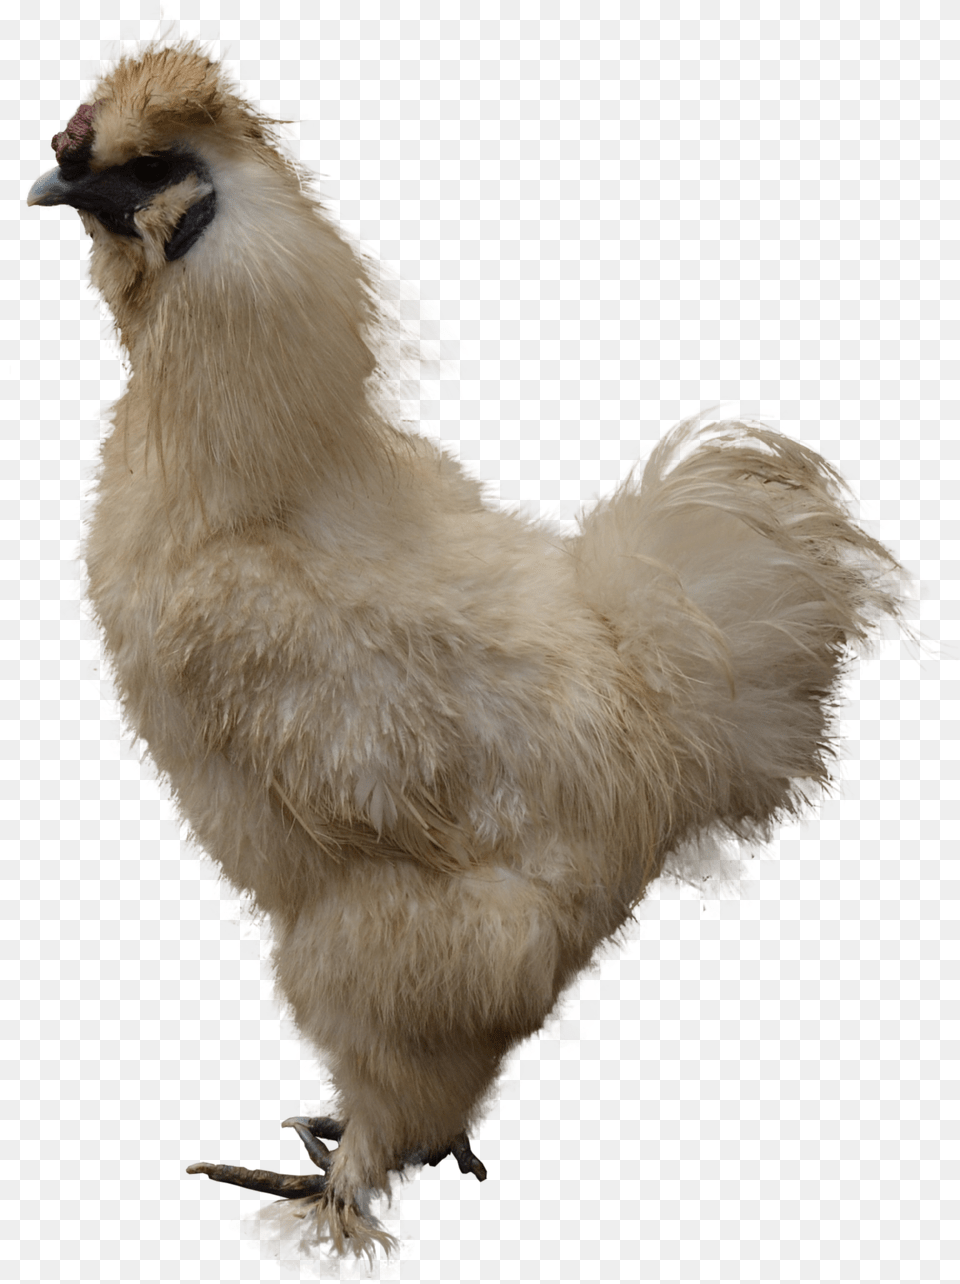 Chicken Images Are To Download Chicken, Animal, Bird, Fowl, Poultry Png